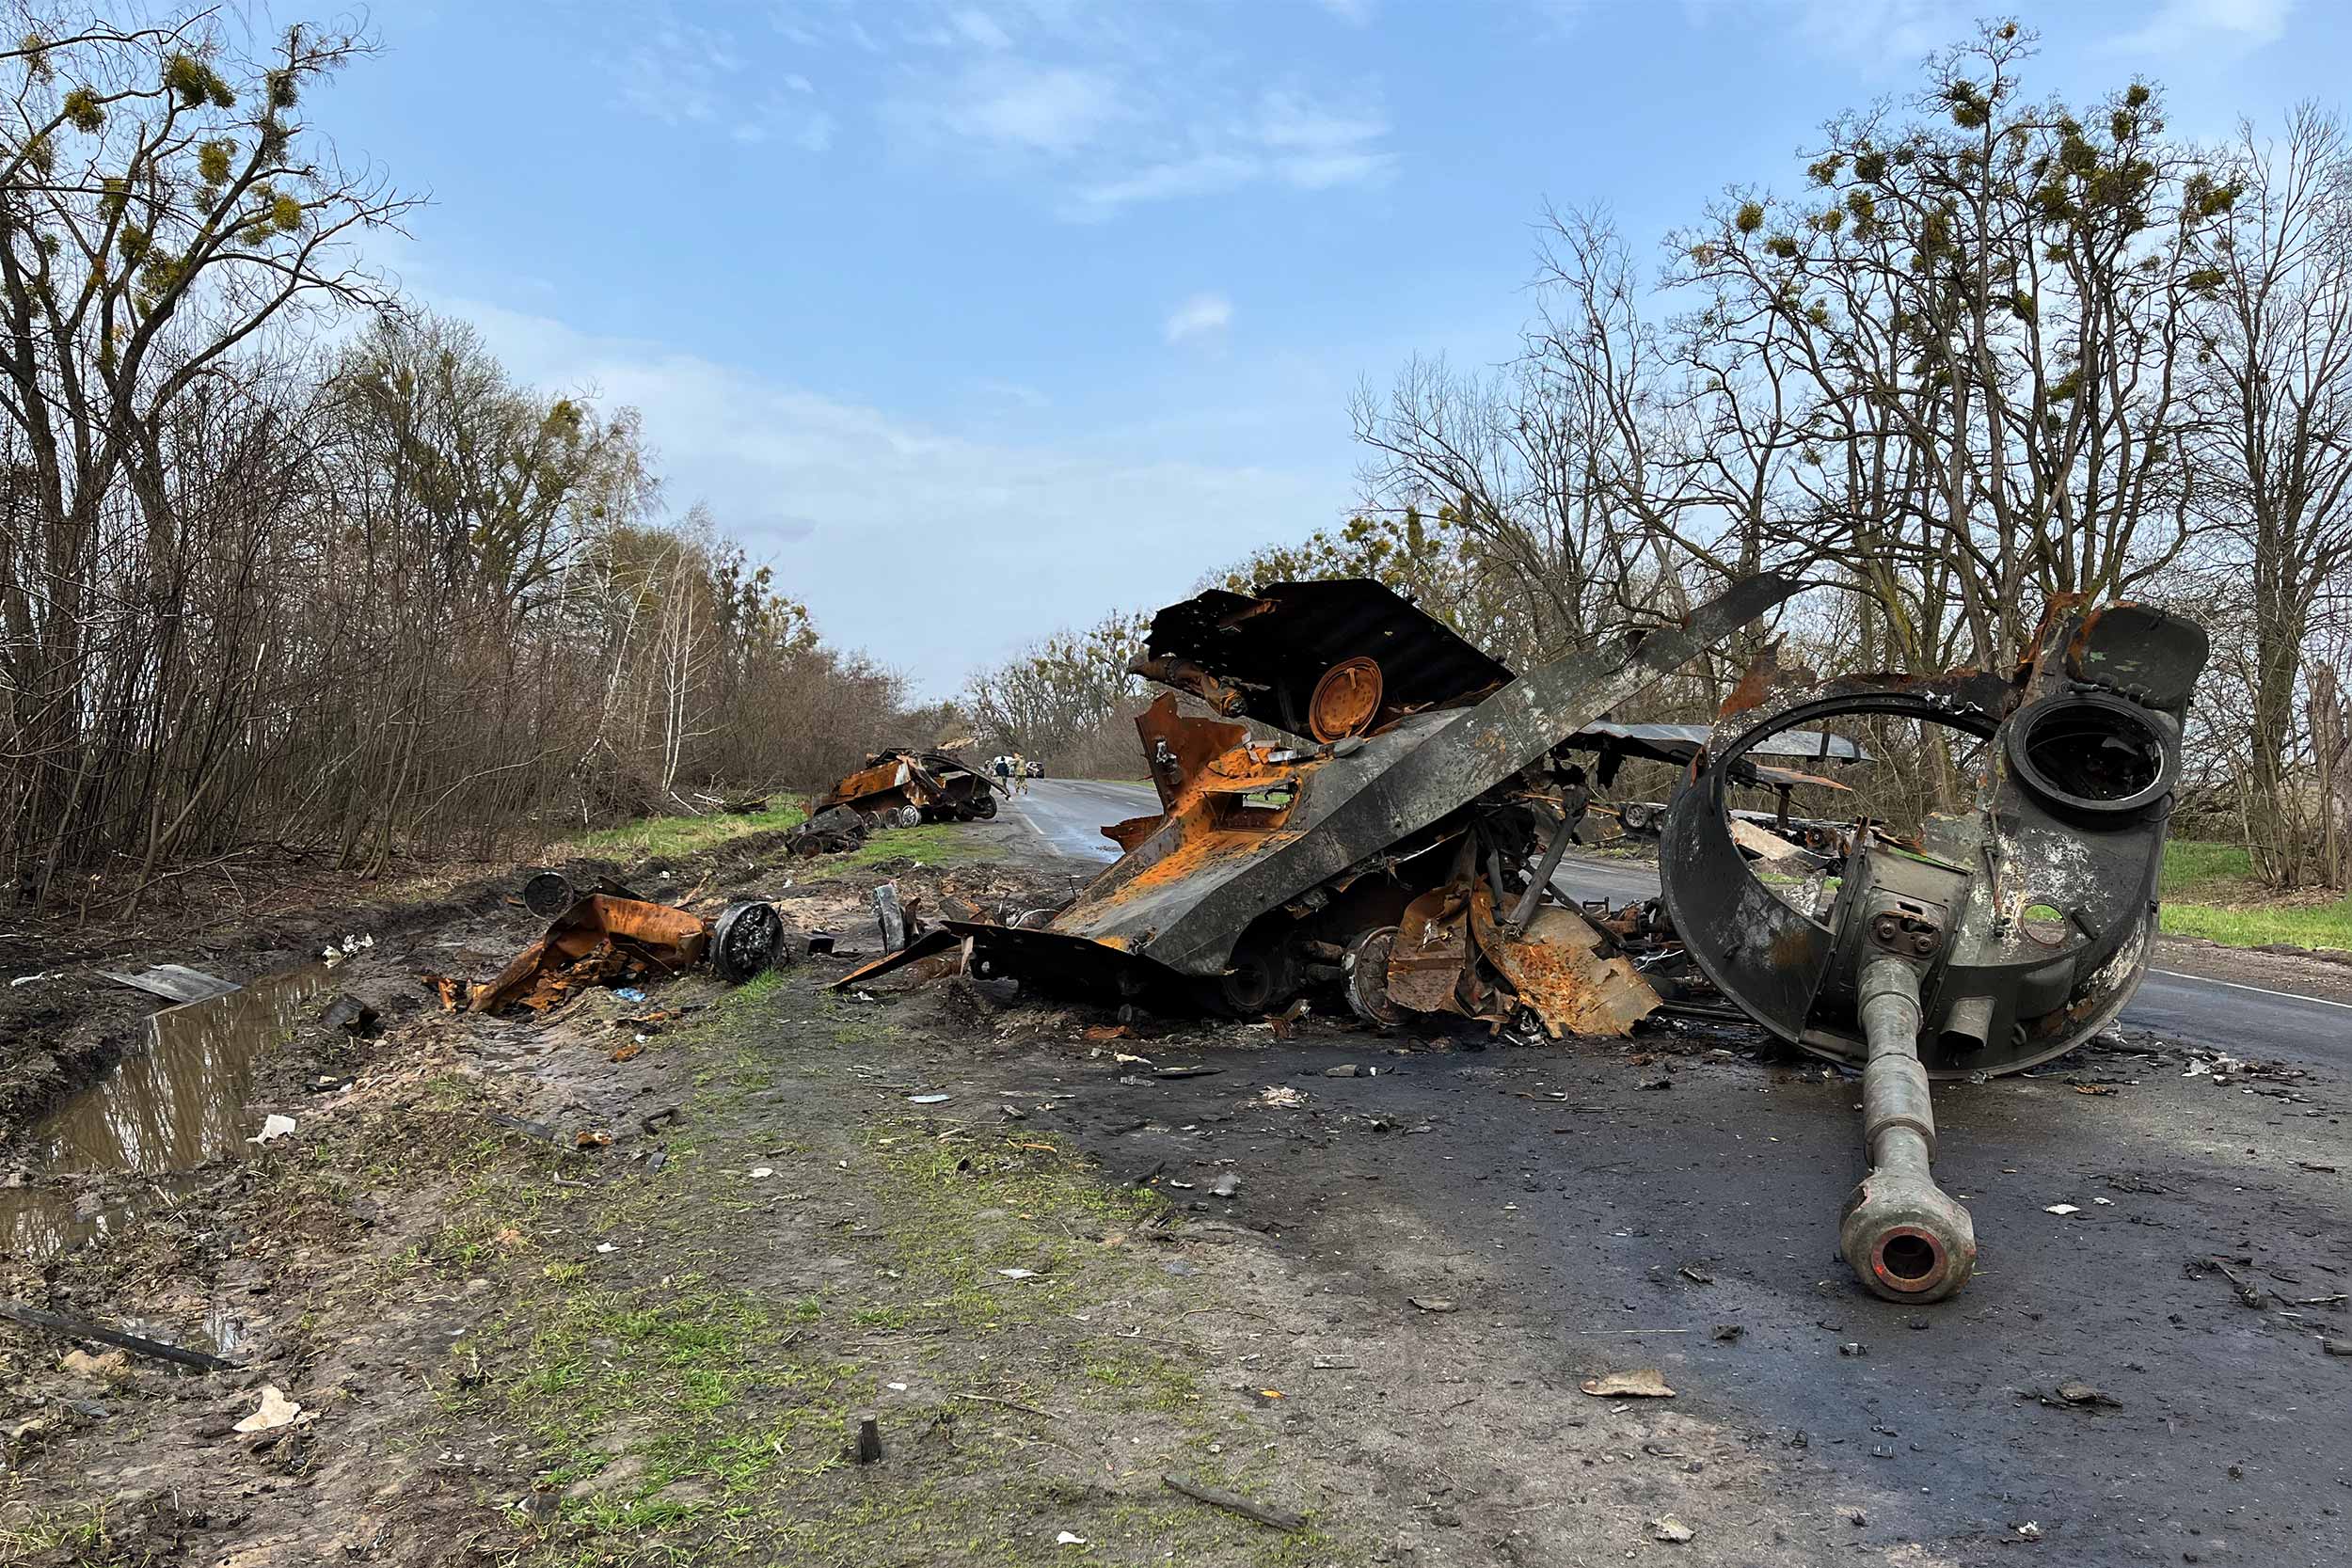 Destroyed military equipment scattered across the road on the drive from Kyiv. © IWPR